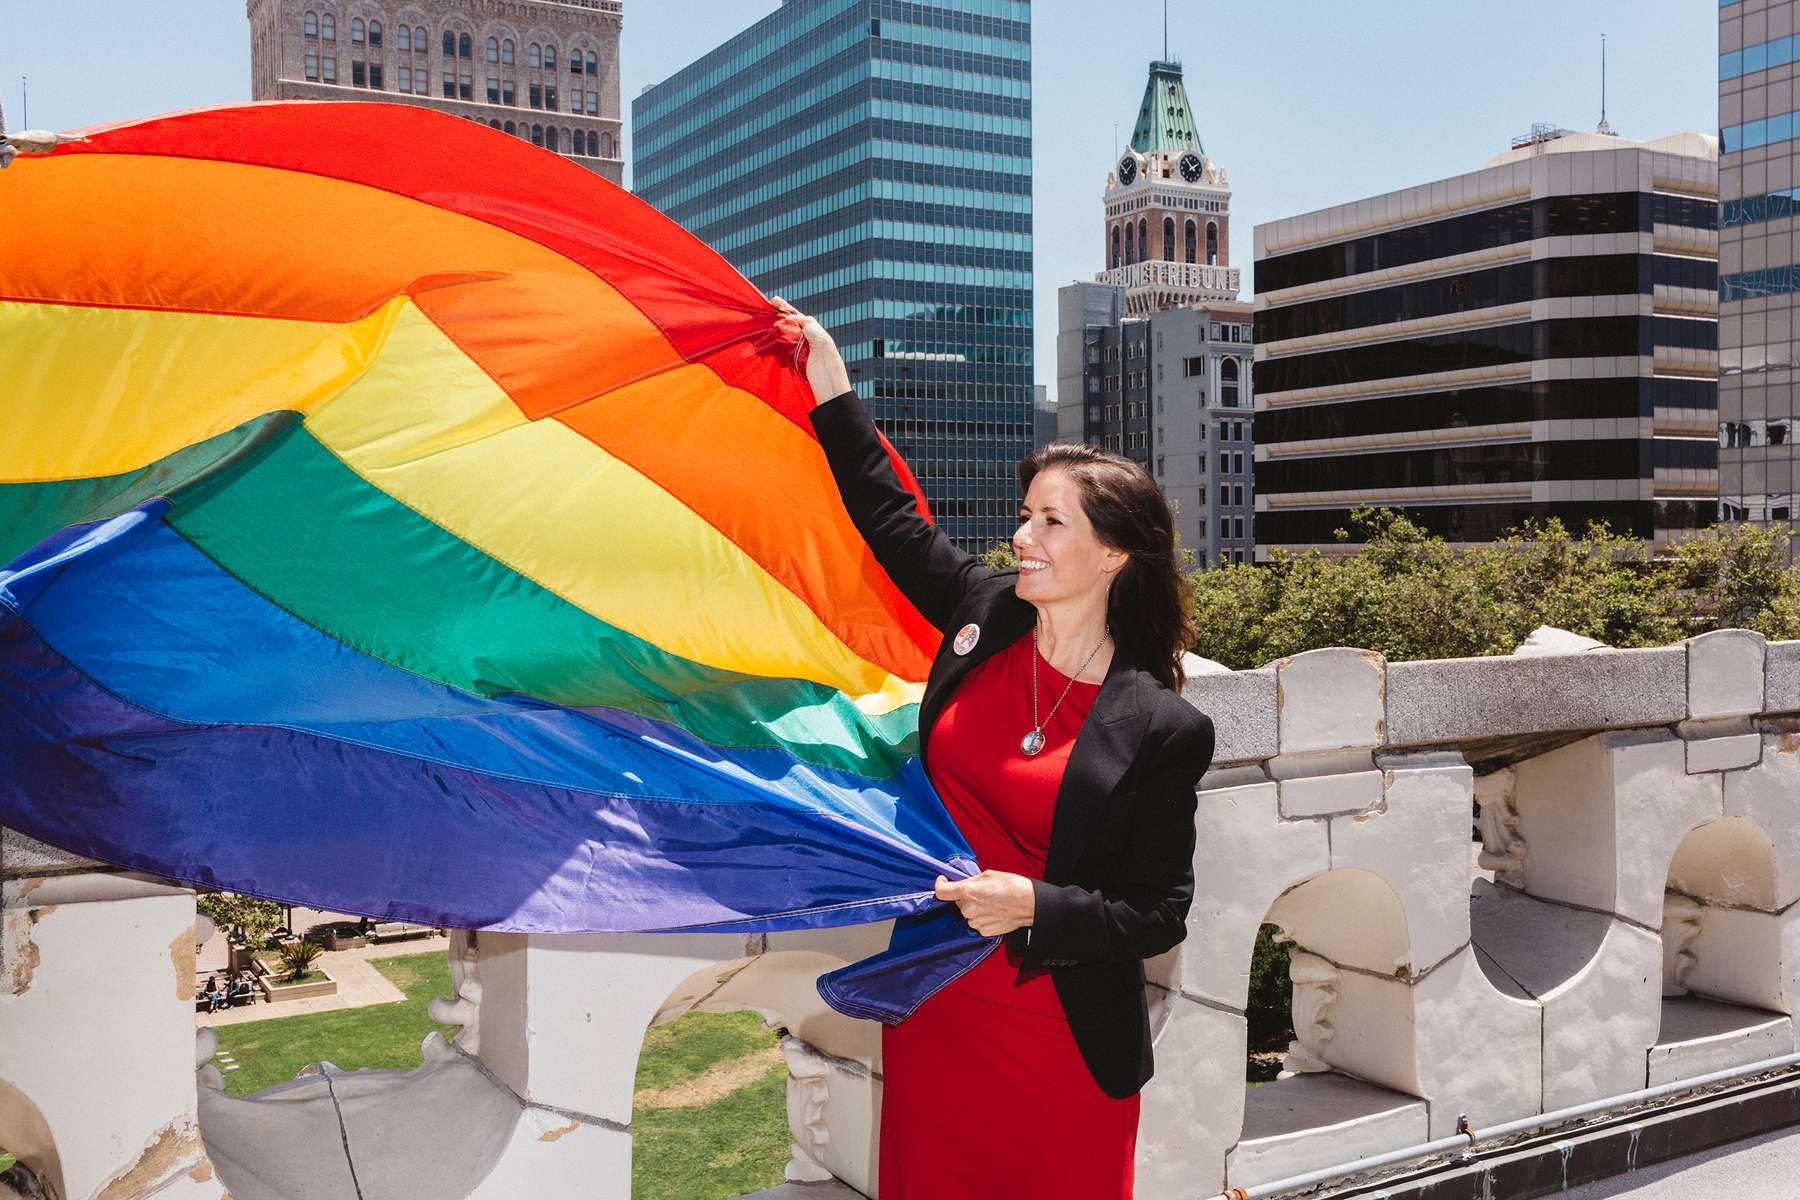 Oakland Mayor Libby Schaaf helps dedicate and raise a flag in honor of Gay Pride on top of City Hall on Thursday, June 22, 2017 in Oakland, Calif.